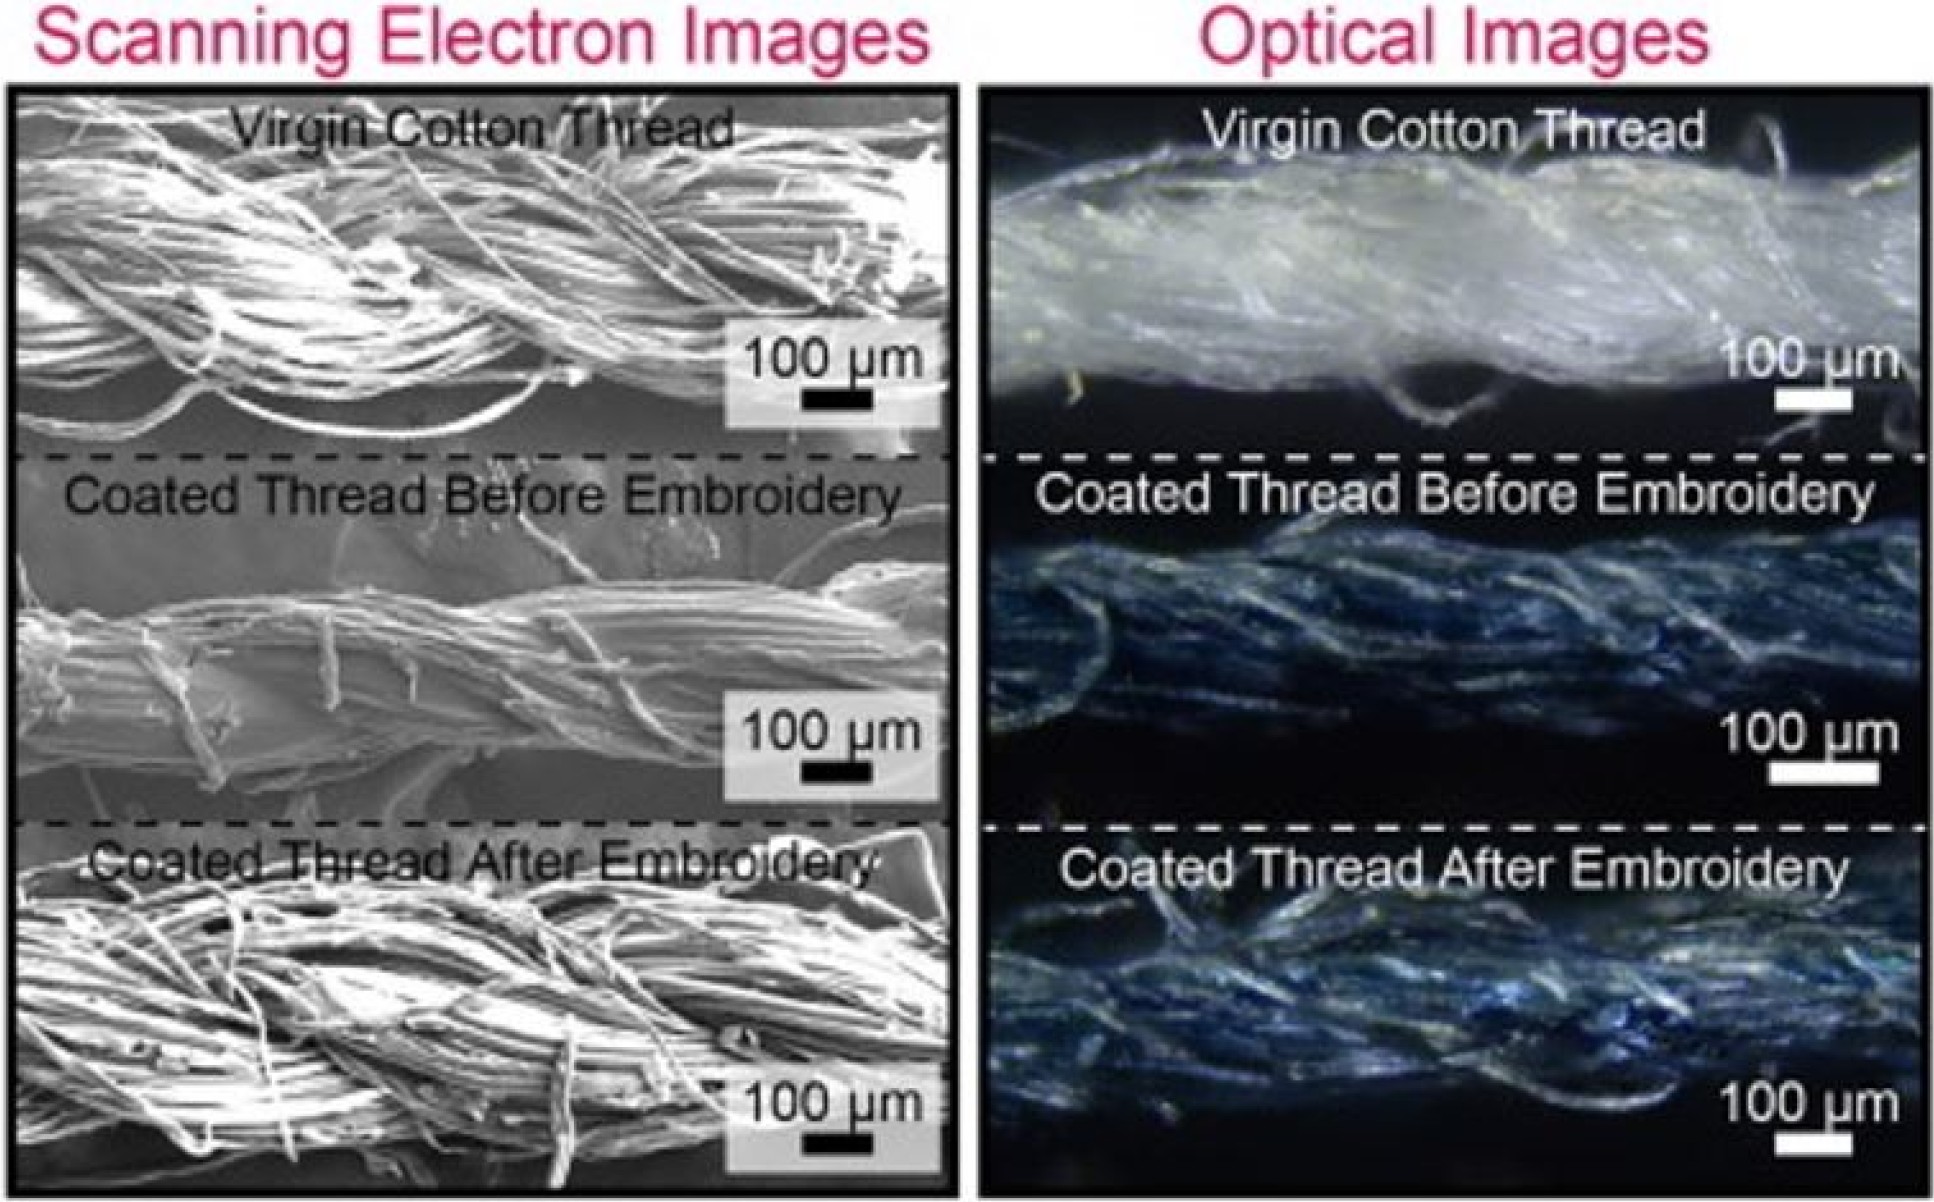 Scanning electron and optical micrographs of a cotton thread, PECOTEX, and PECOTEX after embroidery